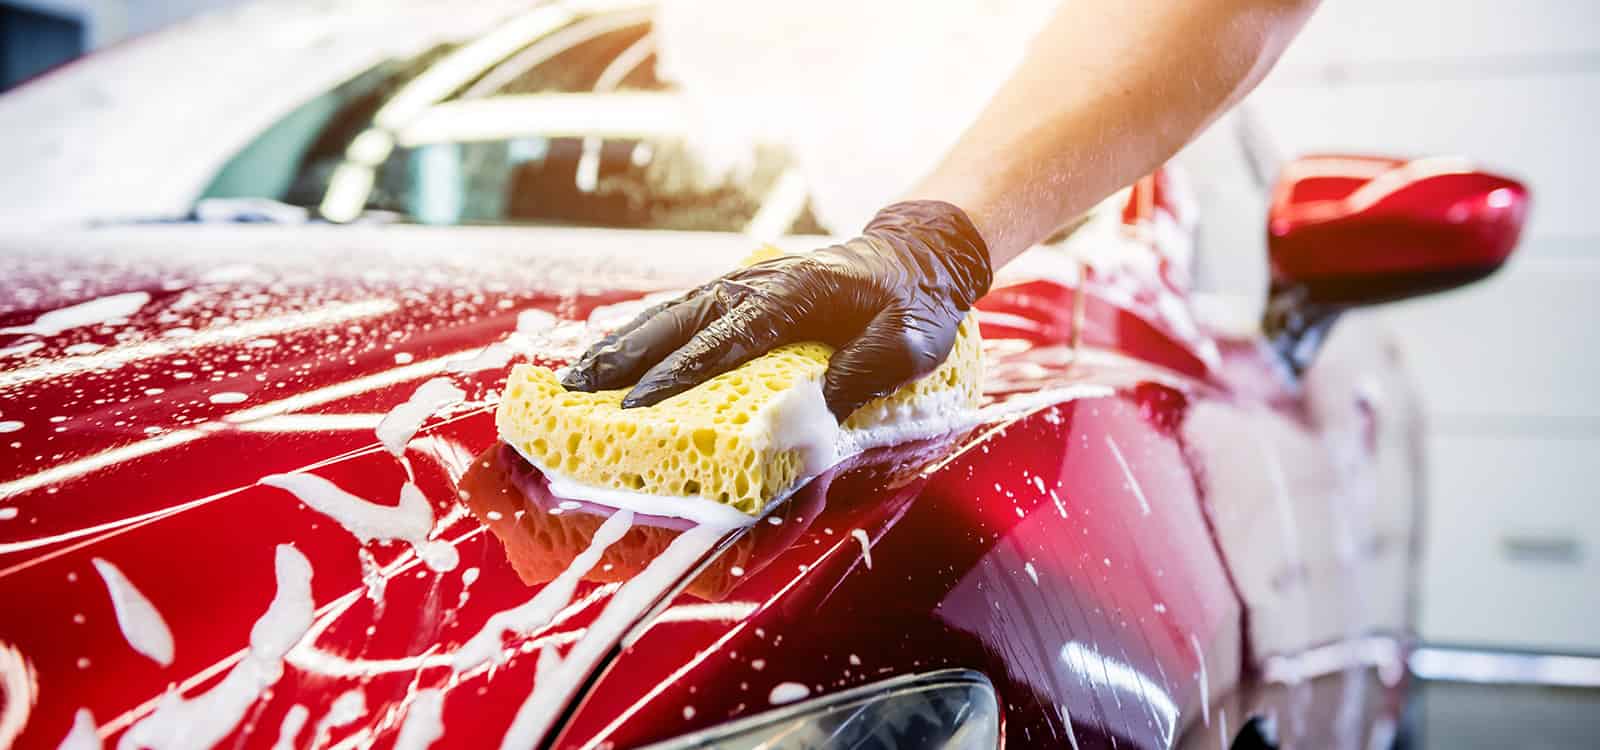 Riverdale Car Wash New Jersey: Automatic Cleaning - Detailing Services